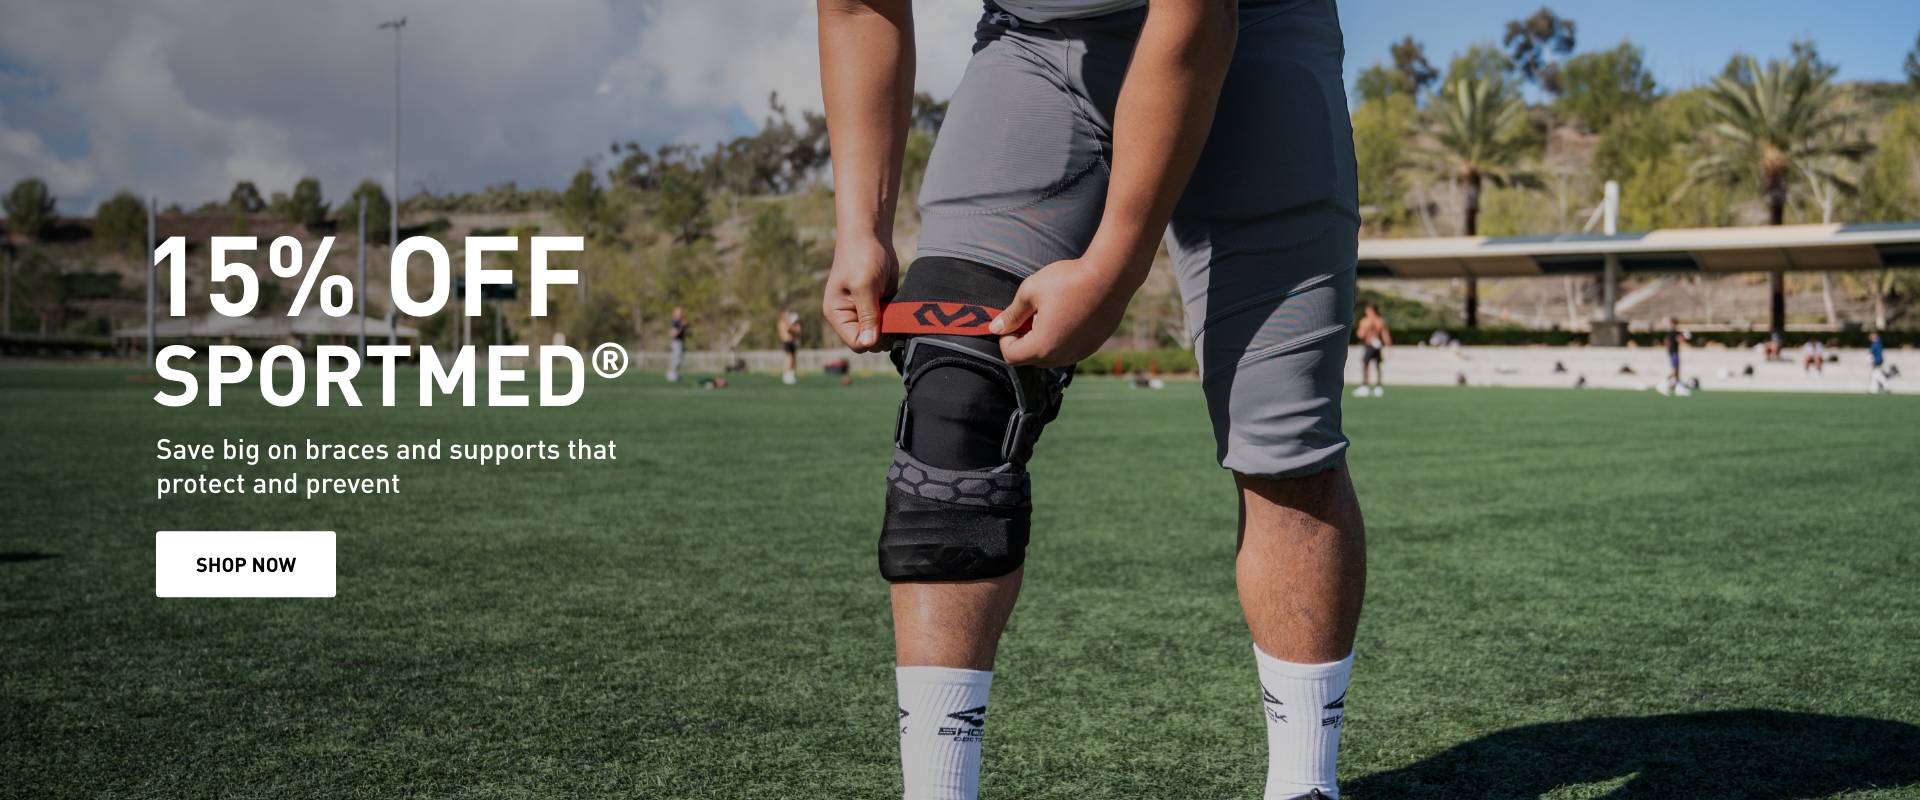 15% Off SPORTMED Save big on braces and supports that protect and prevent. SHOP NOW